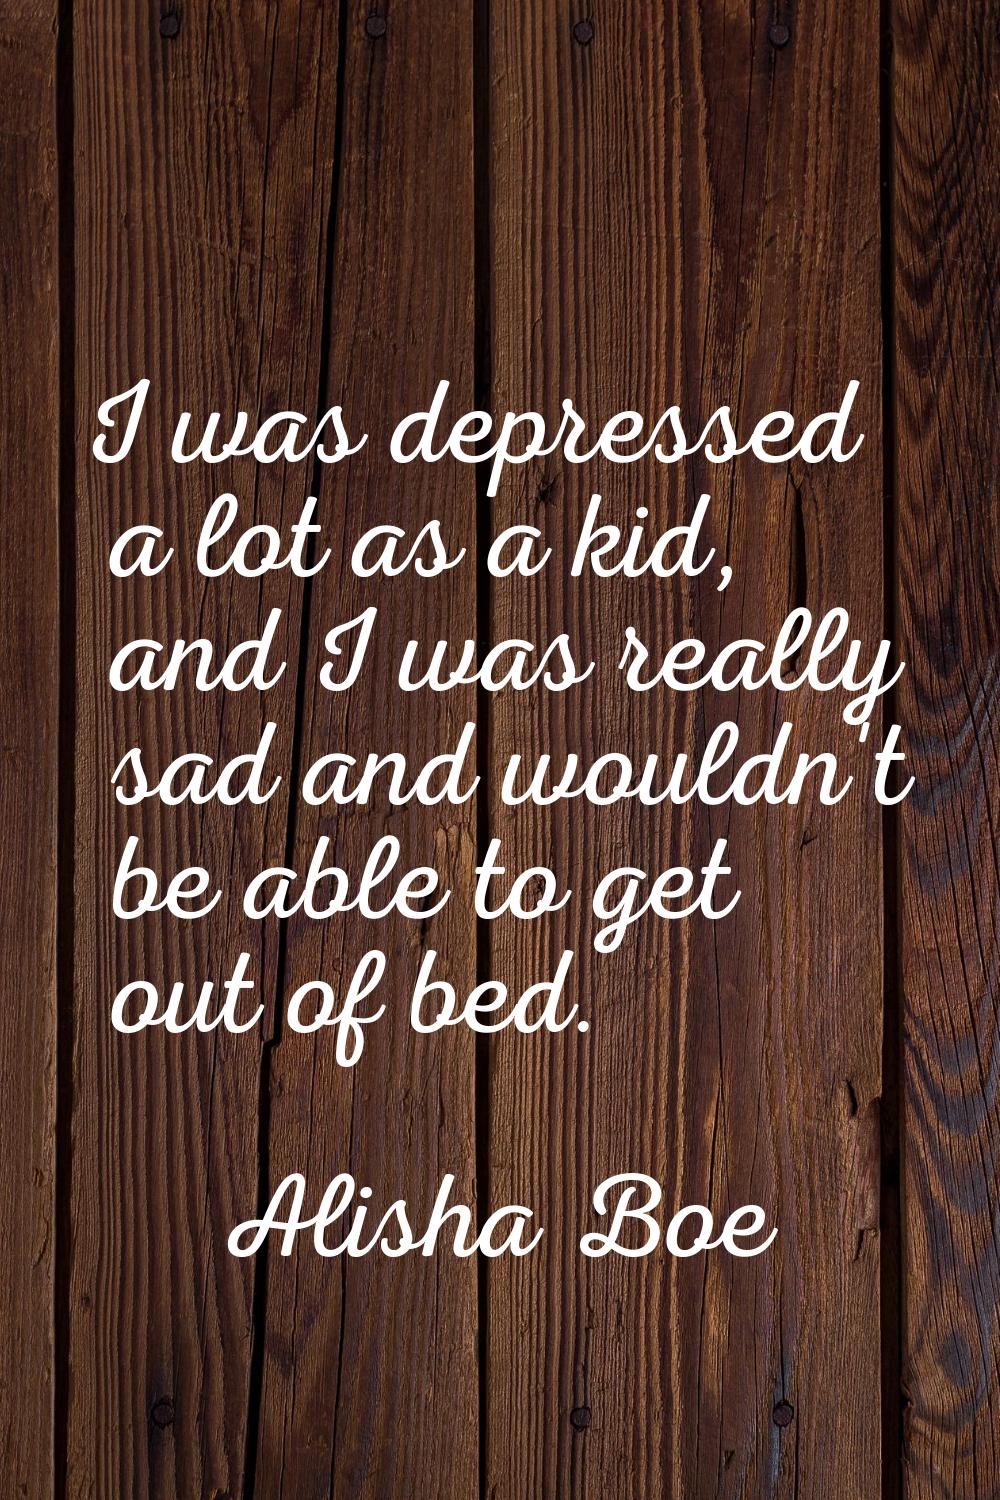 I was depressed a lot as a kid, and I was really sad and wouldn't be able to get out of bed.